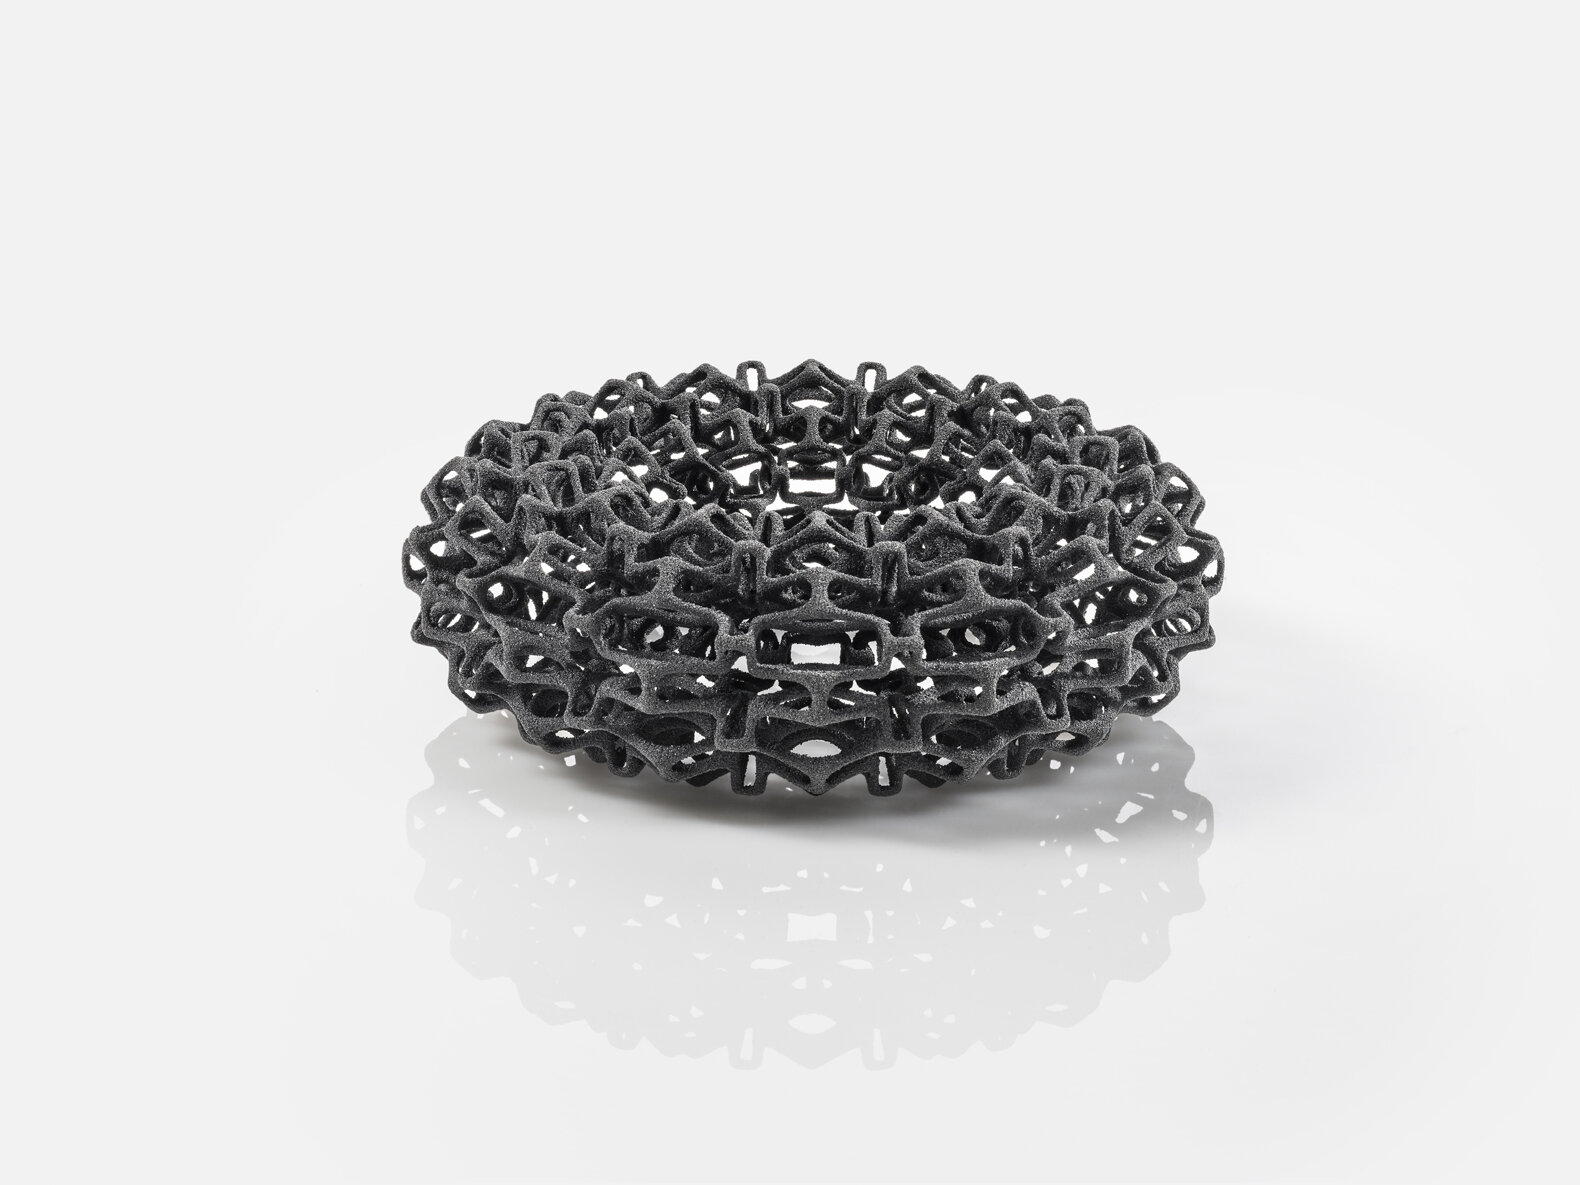 Freedom of design in 3D printing combined with the unique properties of carbon